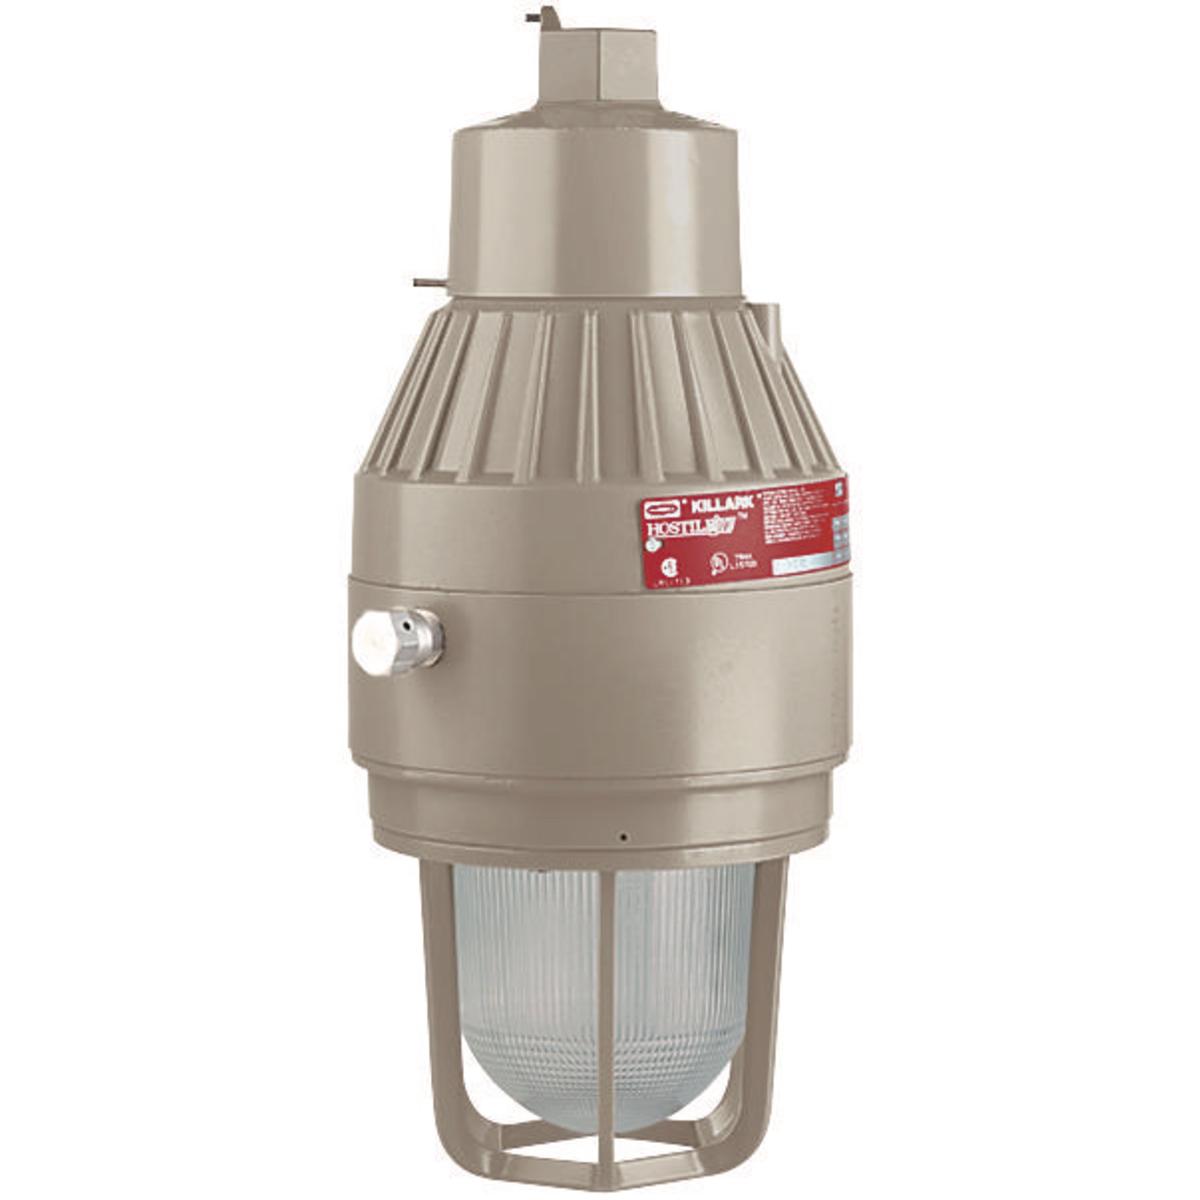 Hubbell EEQ2626E30A2R EEQ Emergency CFL 26N26E 120/277V Red Pendant  ; Quad-Pin long-life triple-tube compact ; Fluorescent lamps included ; Choice of Pendant, Ceiling, Wall or Stanchion mount ; Factory Sealed - No external seal required ; Corrosion resistant-Copper-free alumi